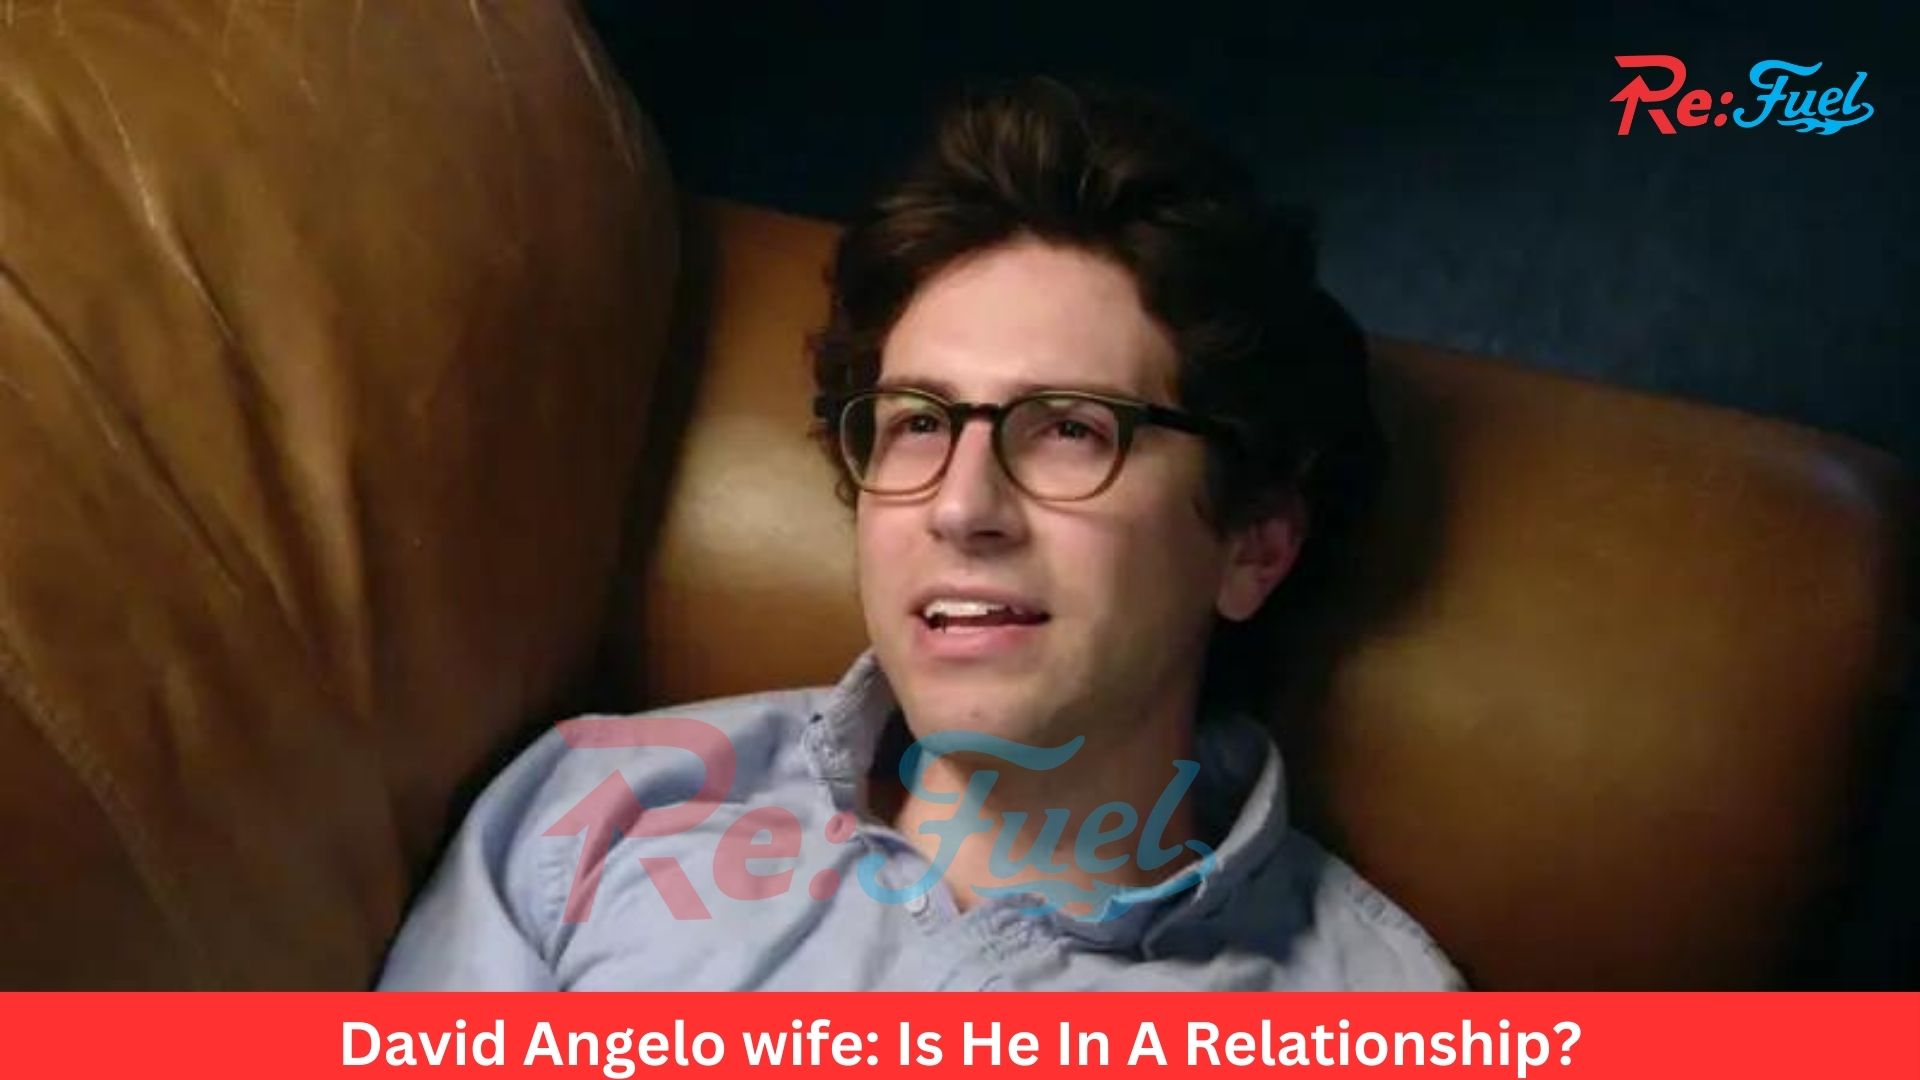 David Angelo wife: Is He In A Relationship?